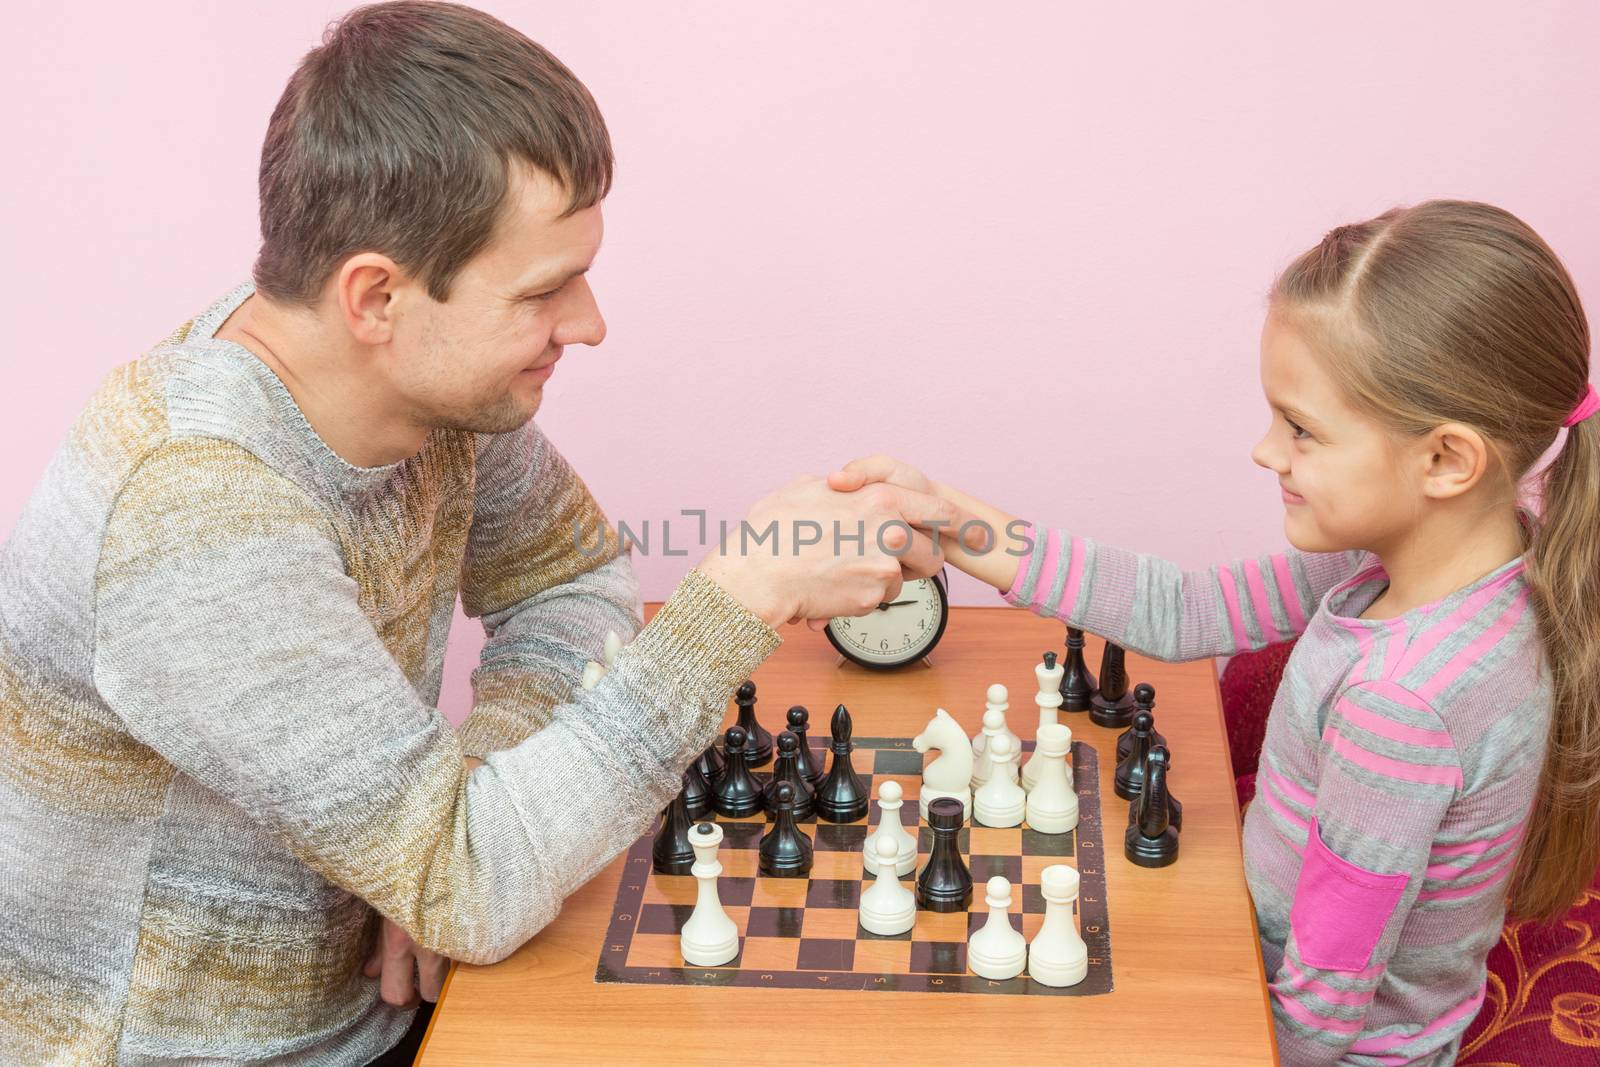 Dad and daughter shook hands, playing a game of chess